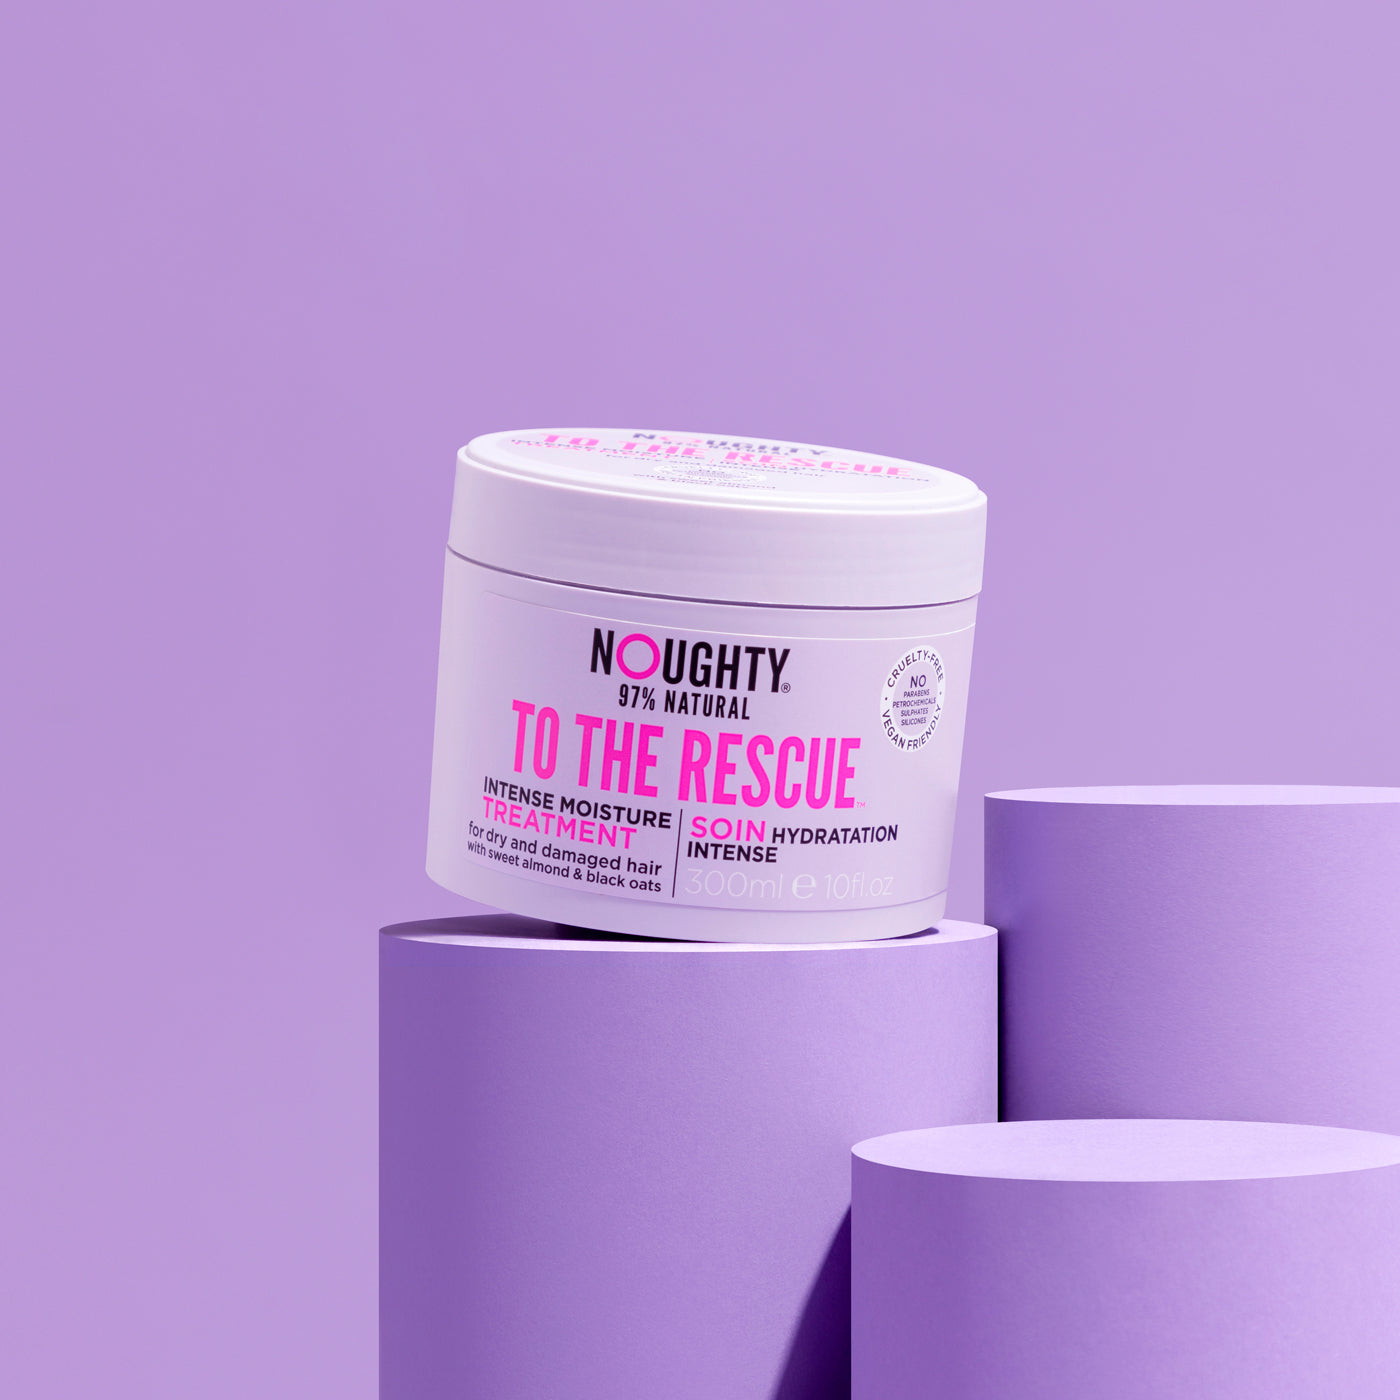 Noughty To The Rescue intense moisture treatment mask for dry damaged hair all hair types. Natural haircare vegan cruelty free natural sulphate free paraben free